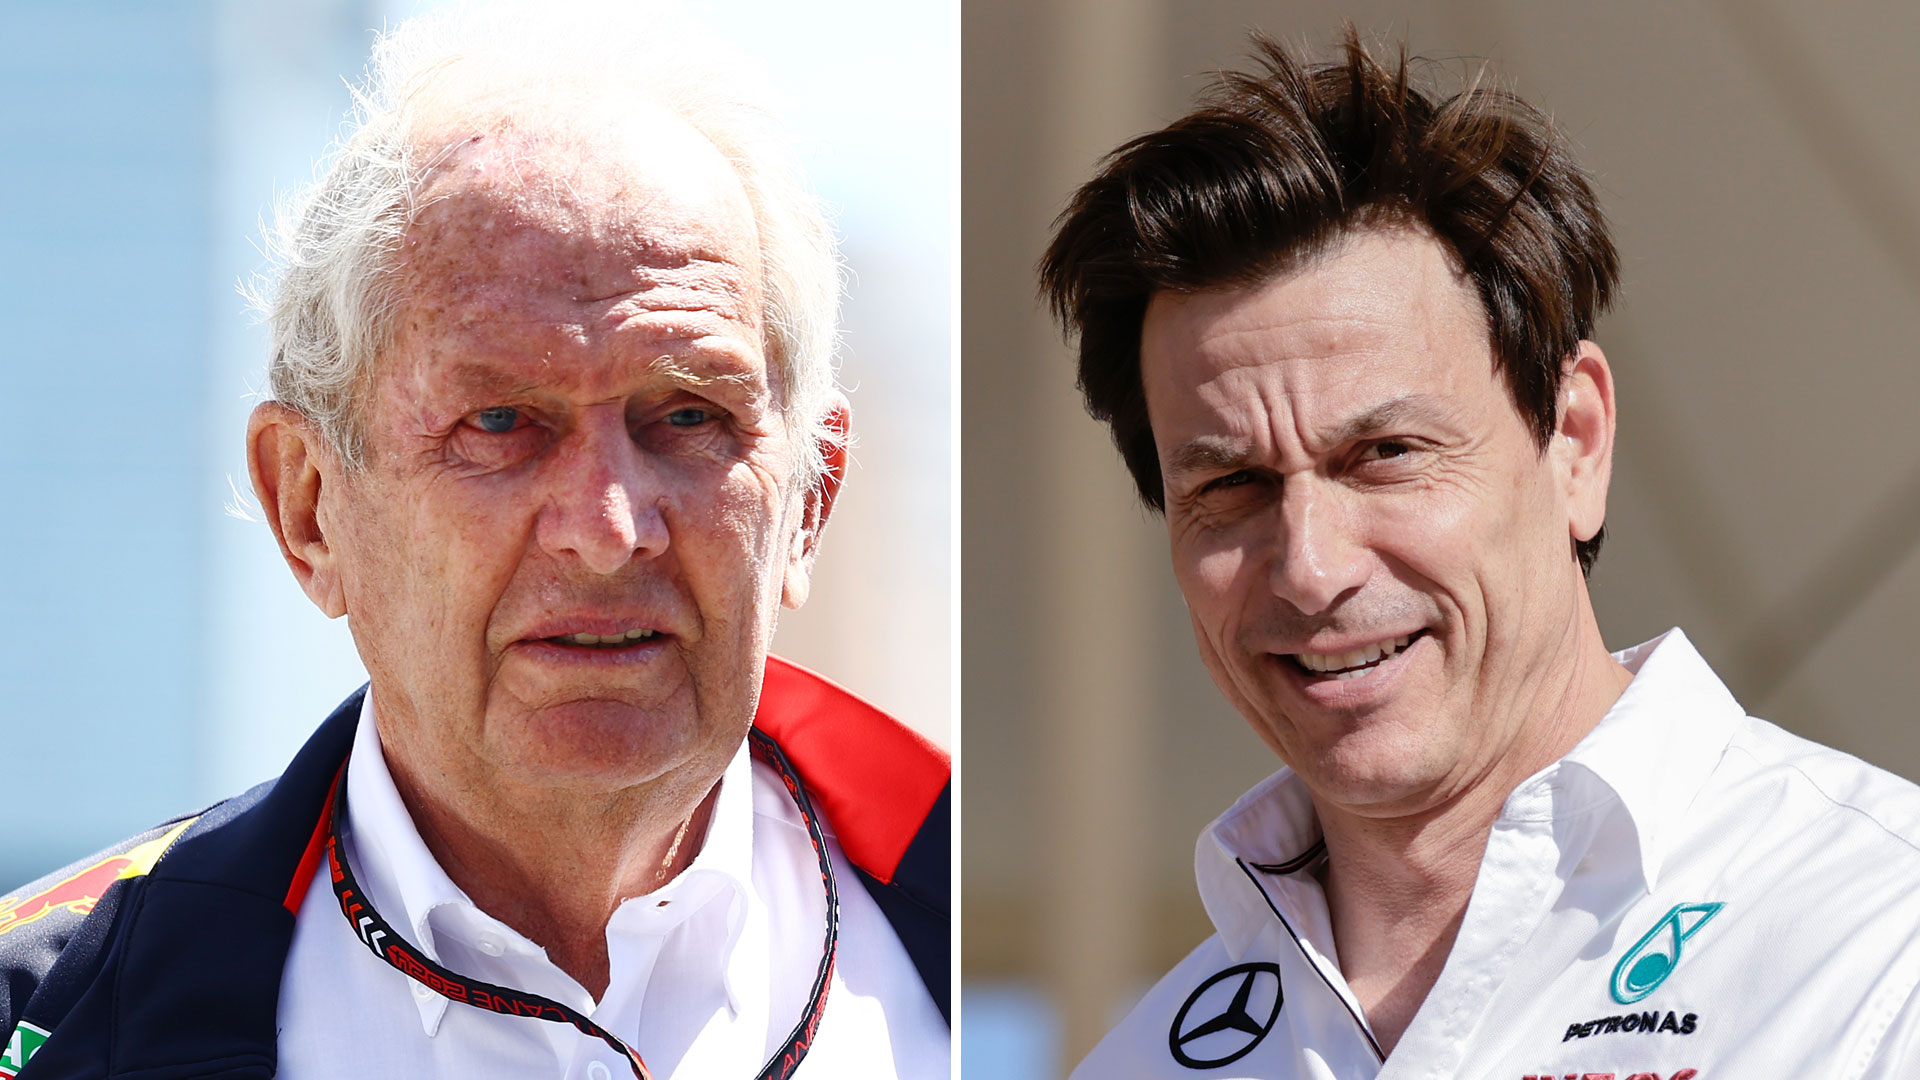 Cheeky Toto Wolff offers Marko Helmut a job amid fears he could be forced out of Red Bull after Christian Horner scandal